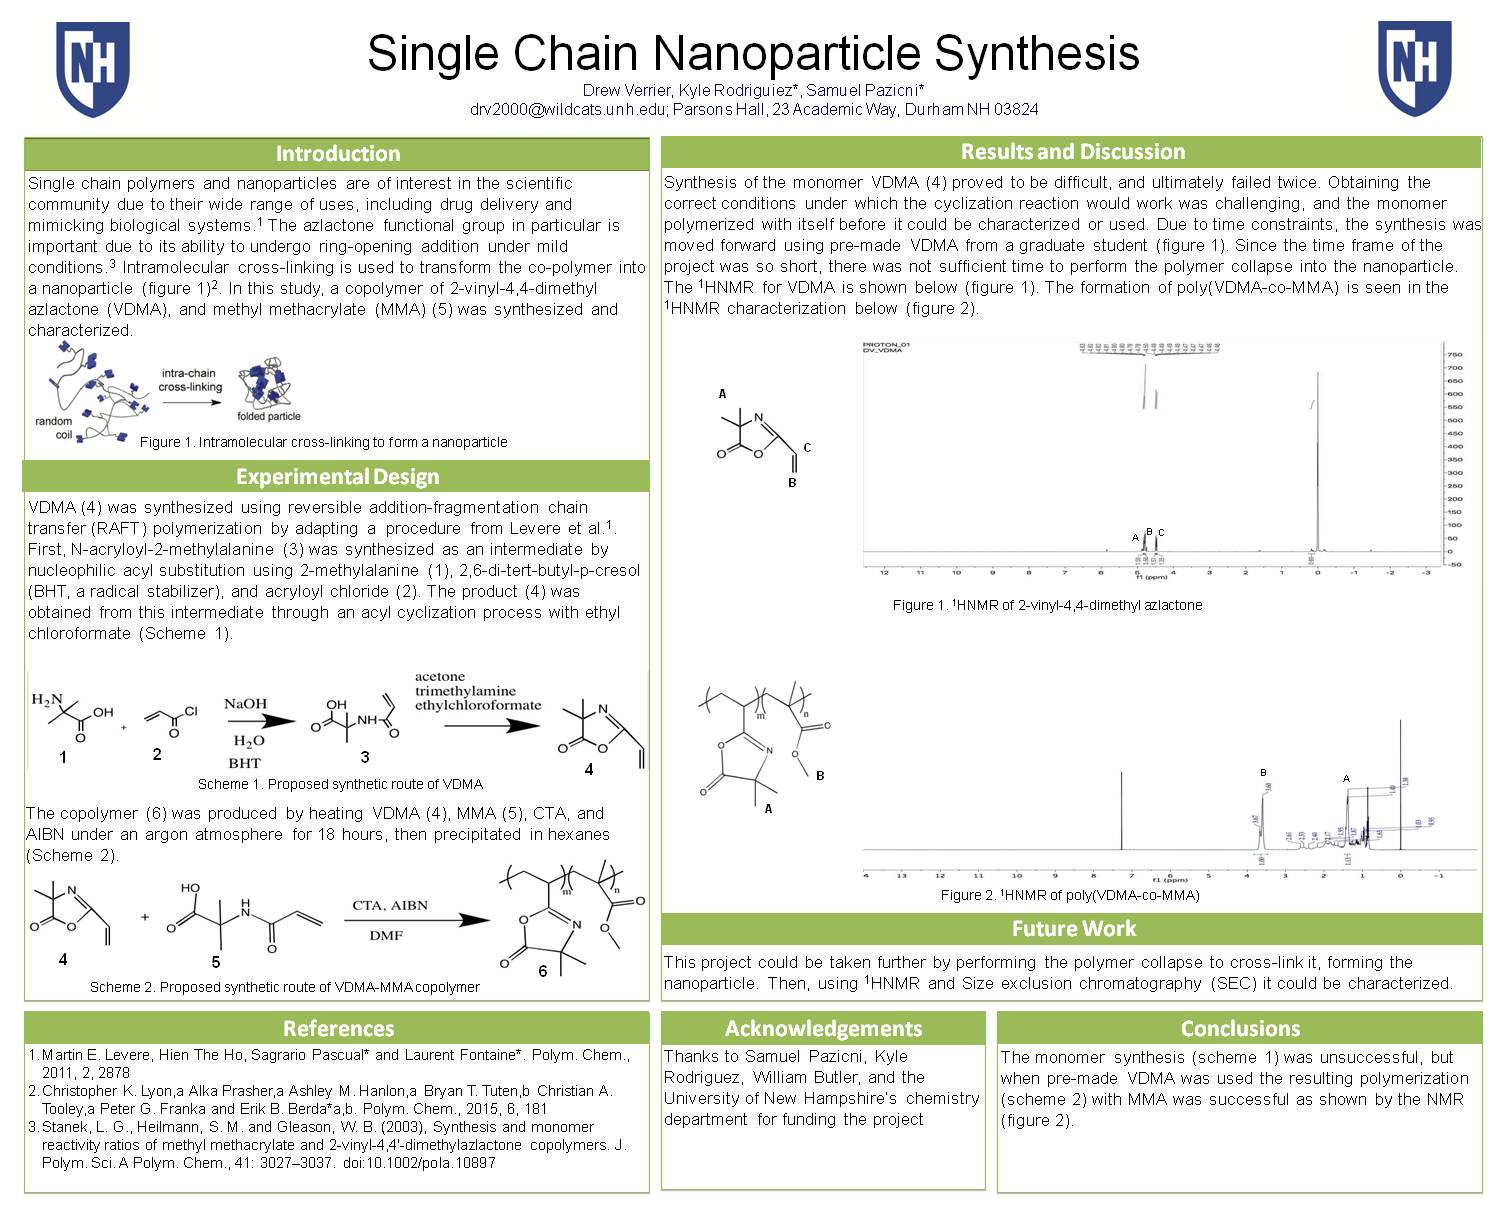 Single Chain Nanoparticle Synthesis by drv2000